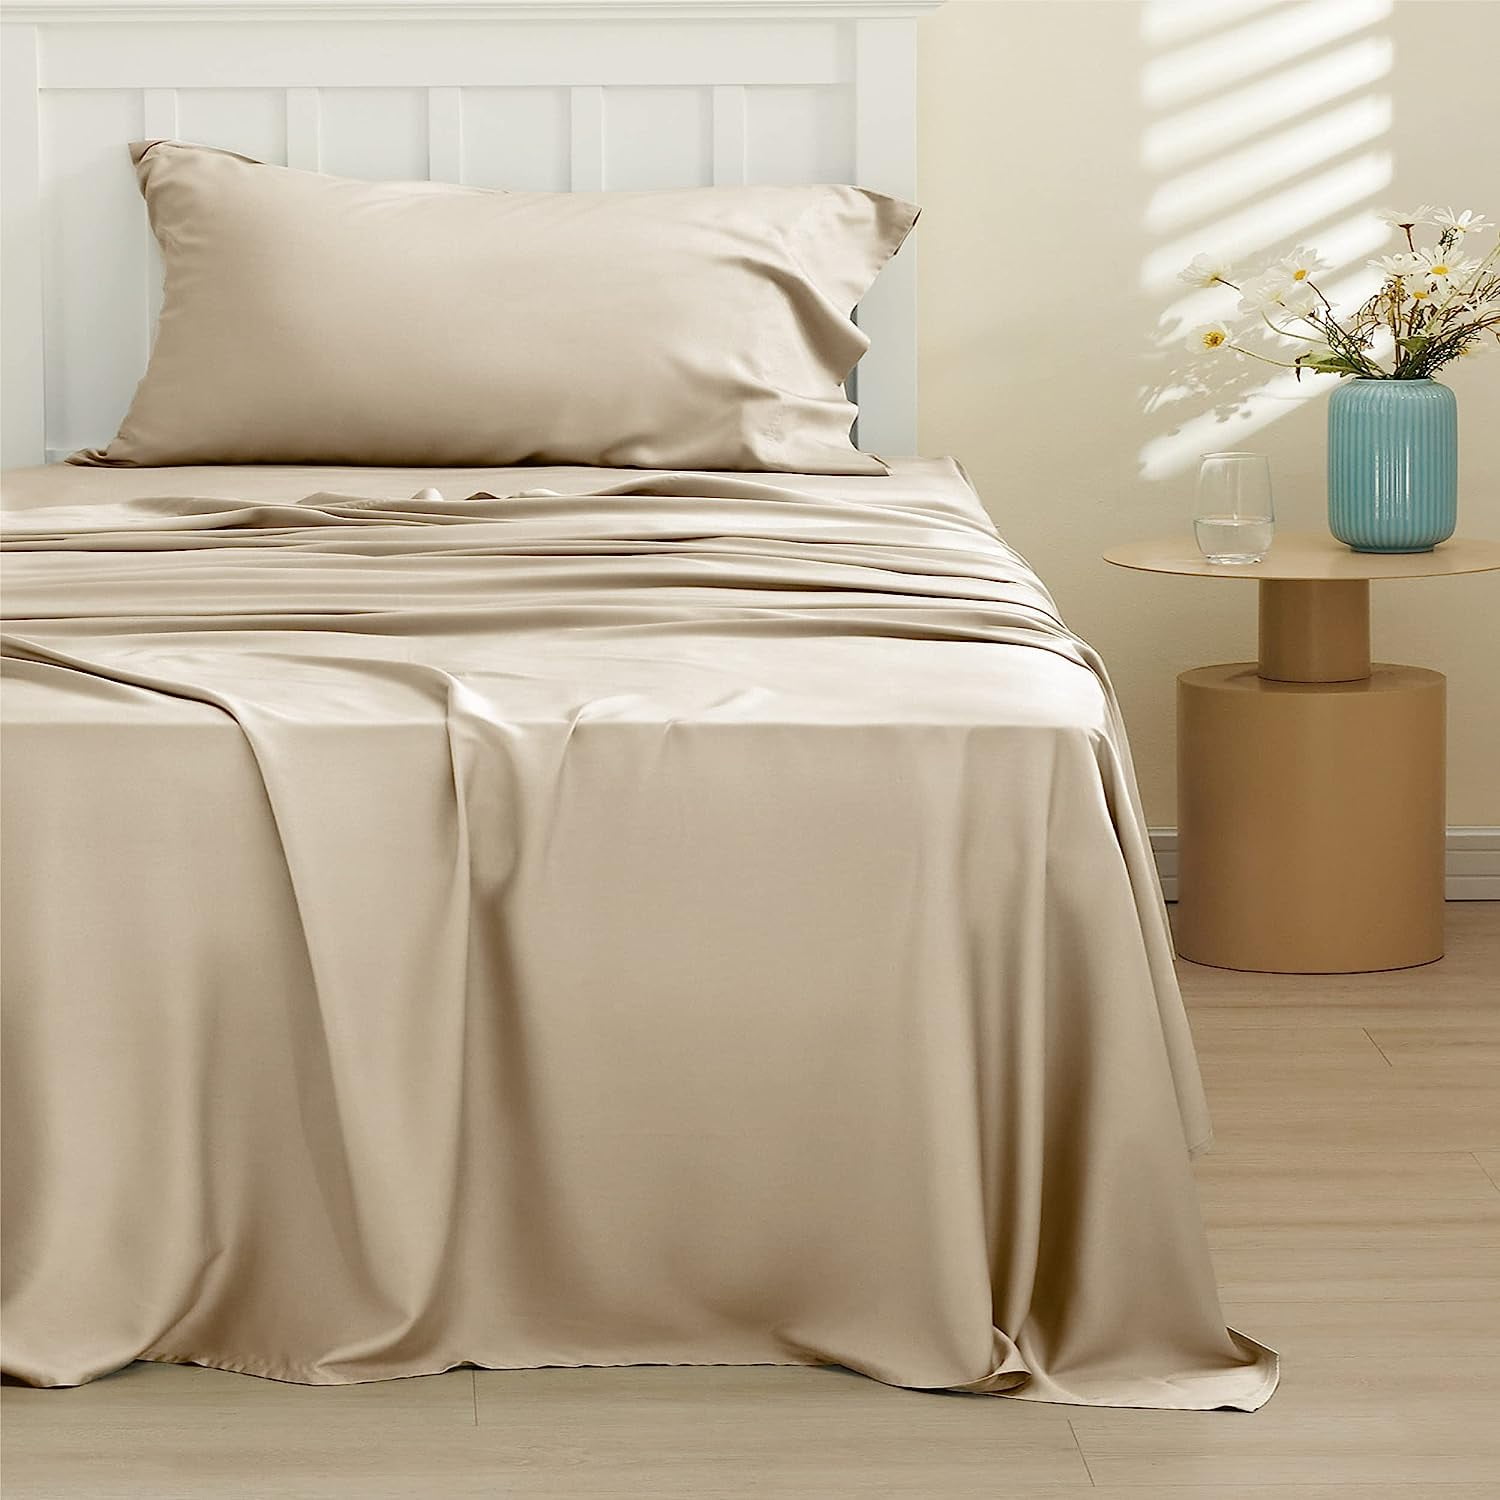 Bedsure Full Cooling Bed Sheets Set, Rayon Derived from Bamboo, Hotel  Luxury Silky Breathable Bedding Sheets & Pillowcases, Beige 